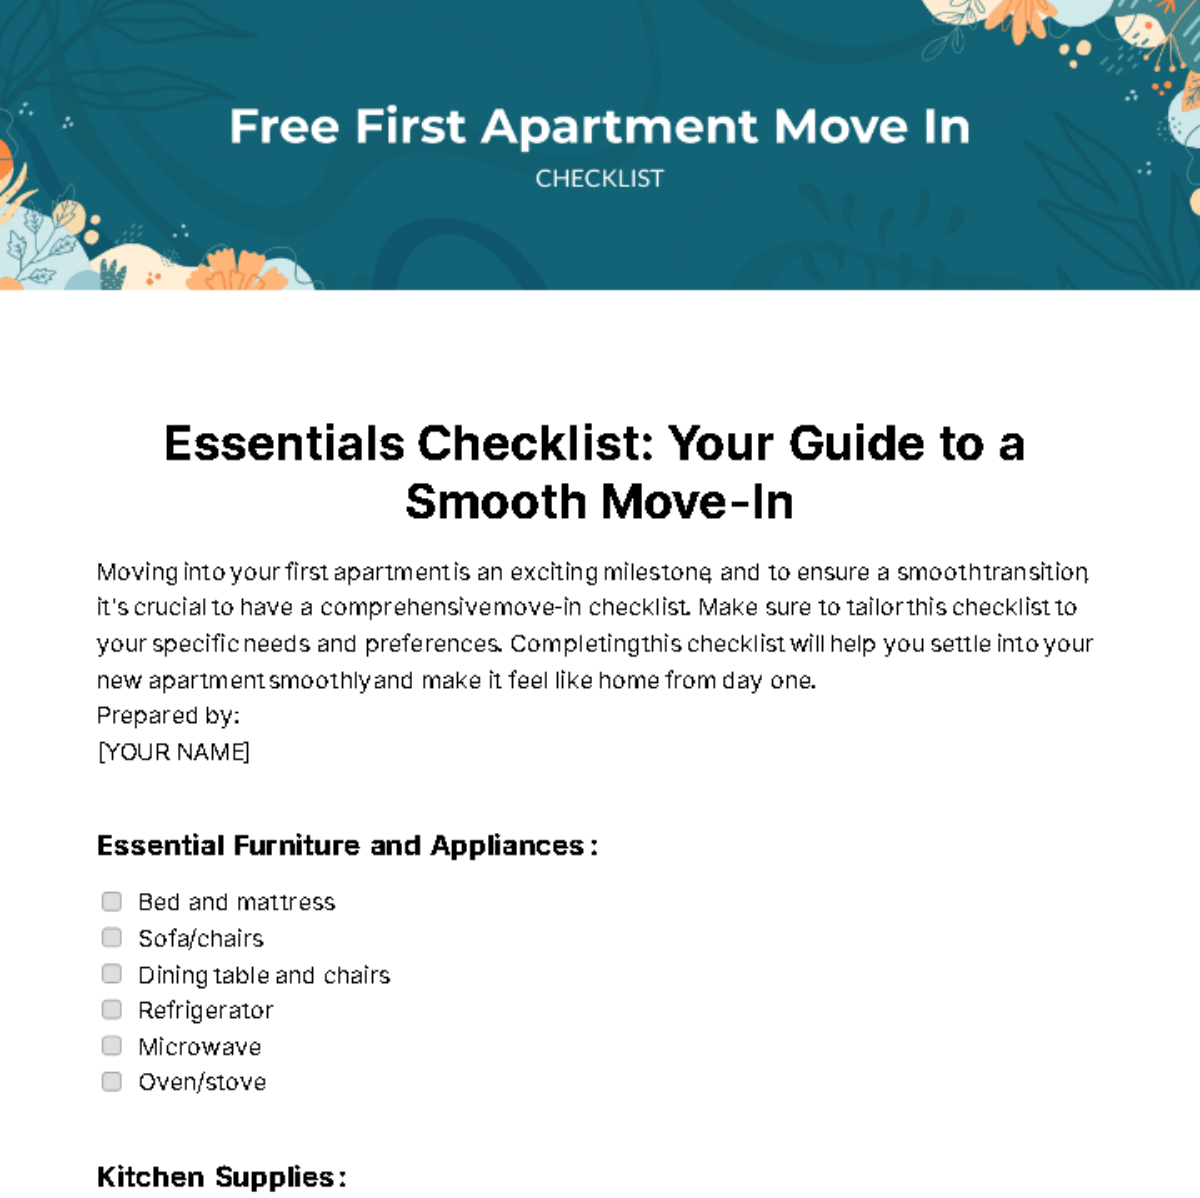 Free First Apartment Move In Checklist Template